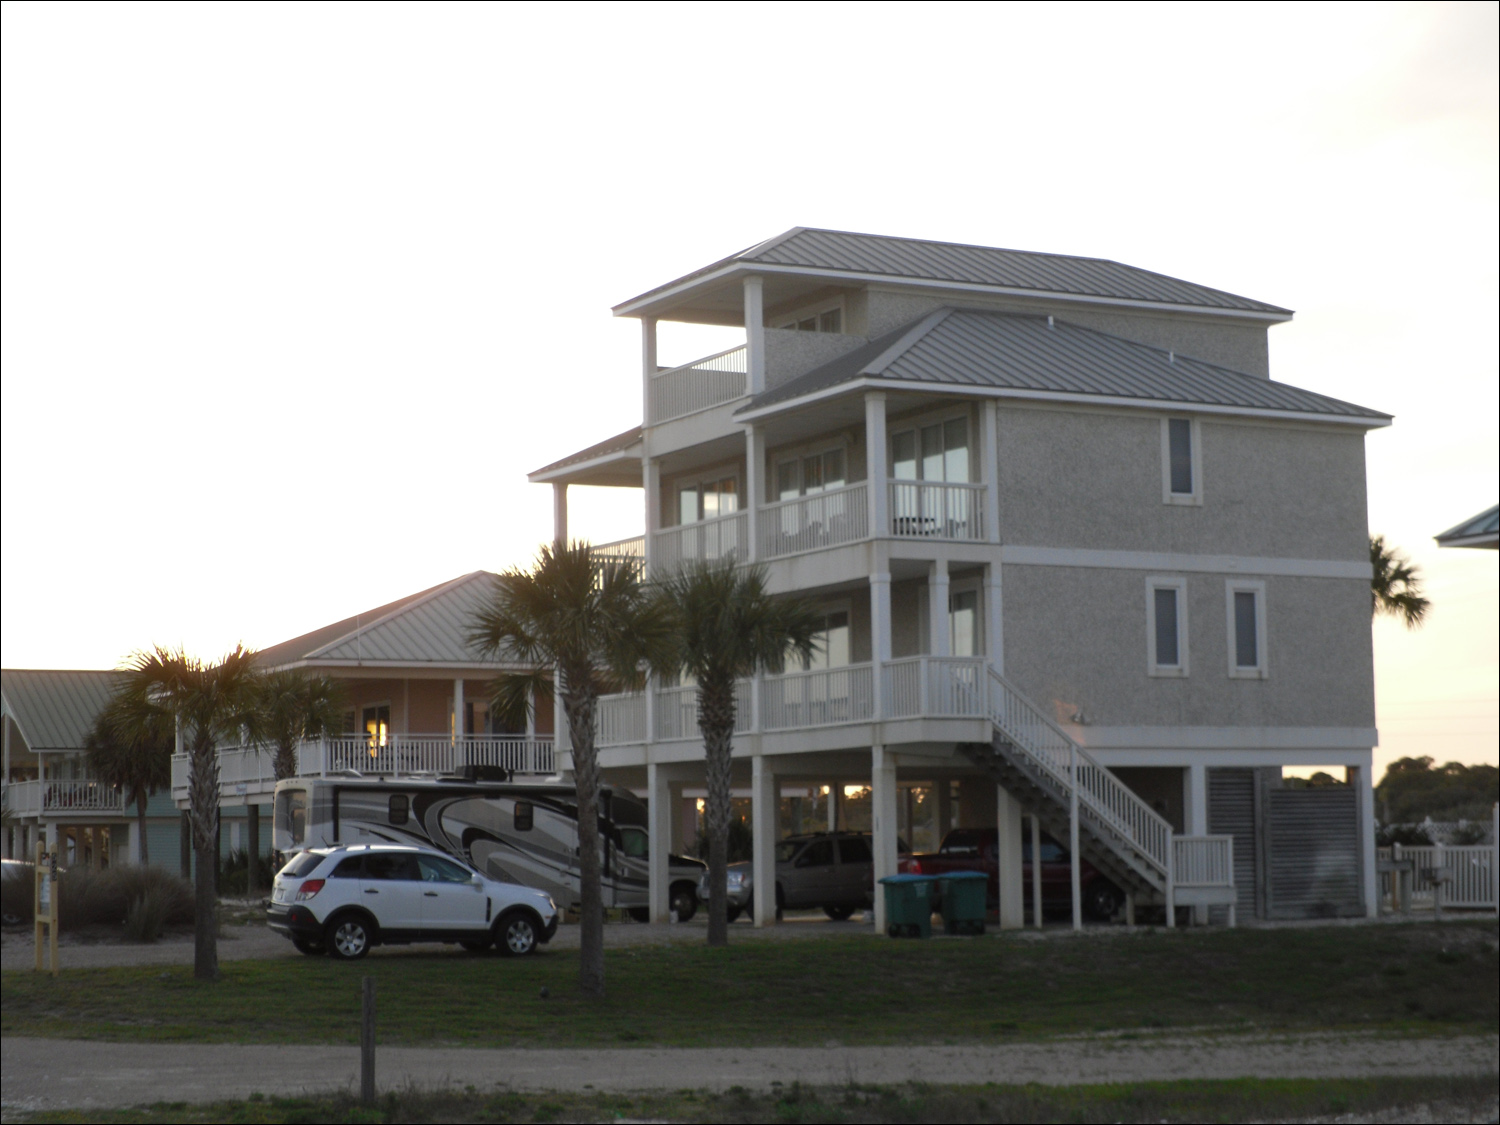 Our rental house @St George Island